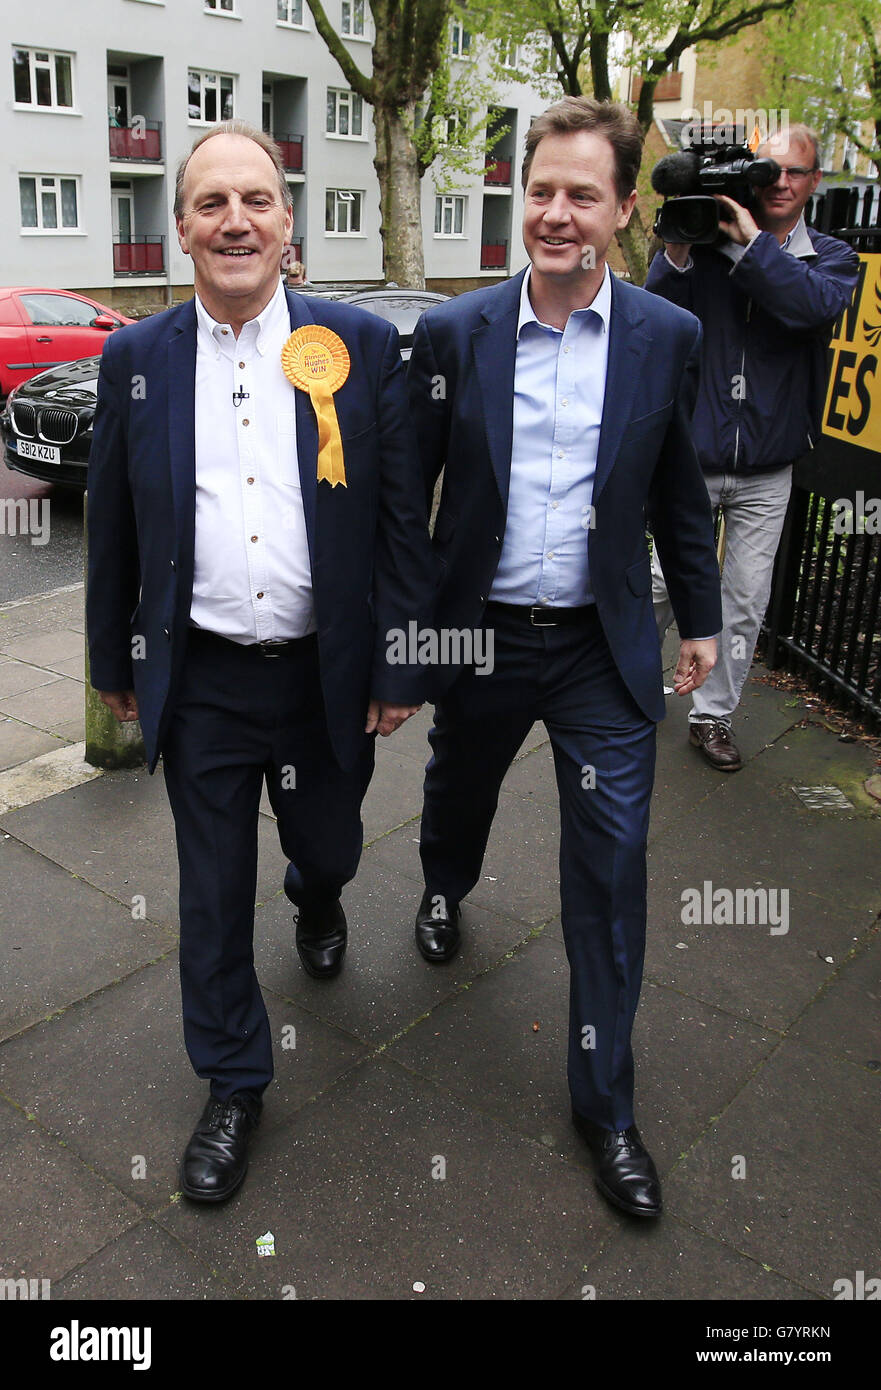 RETRANSMITTED CORRECTING LOCATION Liberal Democrat Party leader Nick Clegg with parliamentary candidate for Bermondsey and Old Southwark Simon Hughes (left) attend a campaign rally at Rennie and Manor Estates Tenants Association Hall, Bermondsey, London. Stock Photo